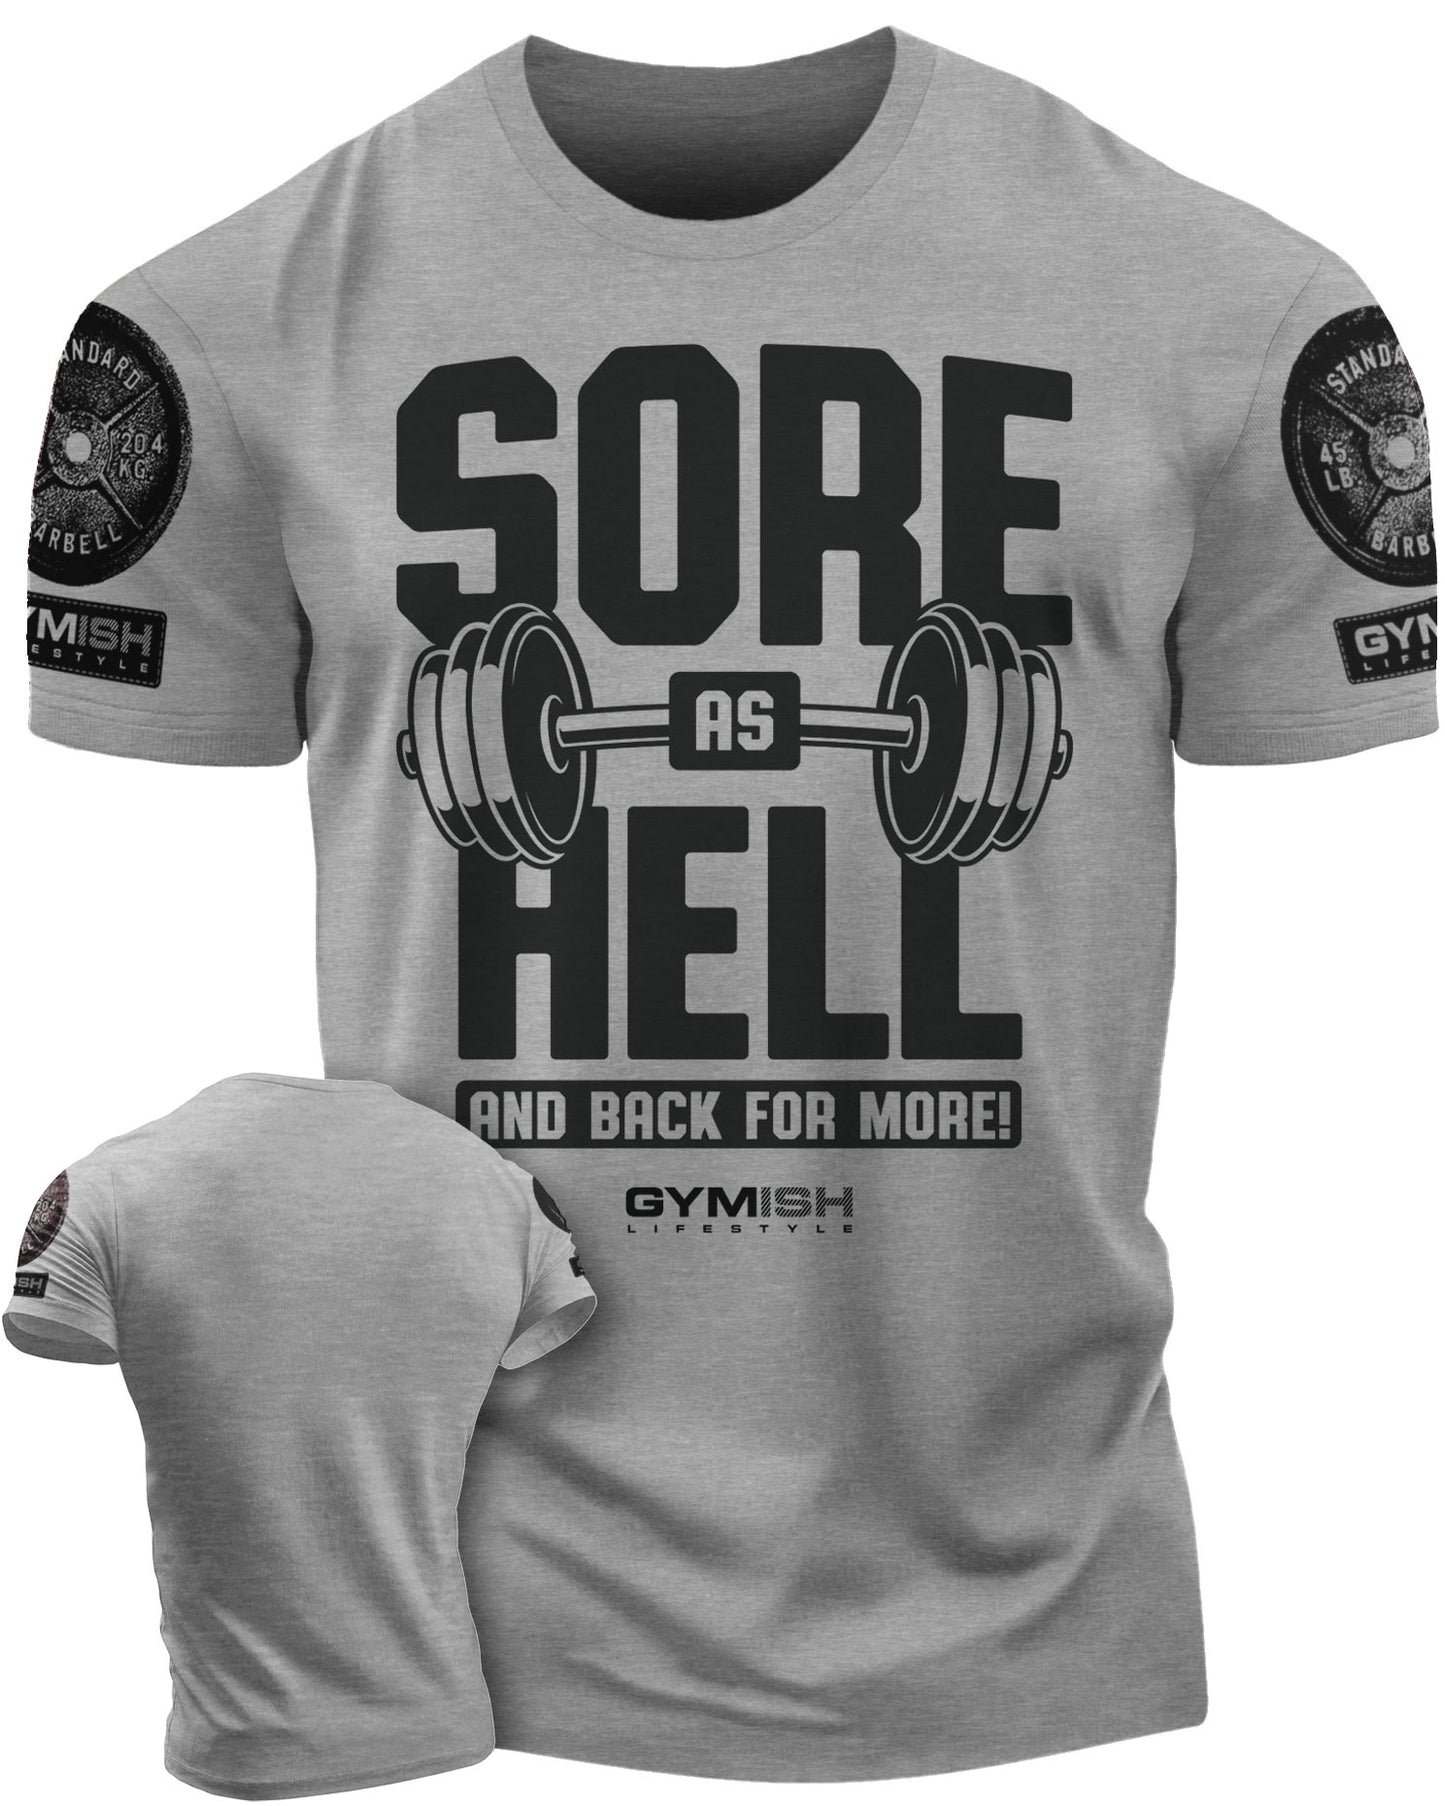 008. Sore As Hell and Back For More